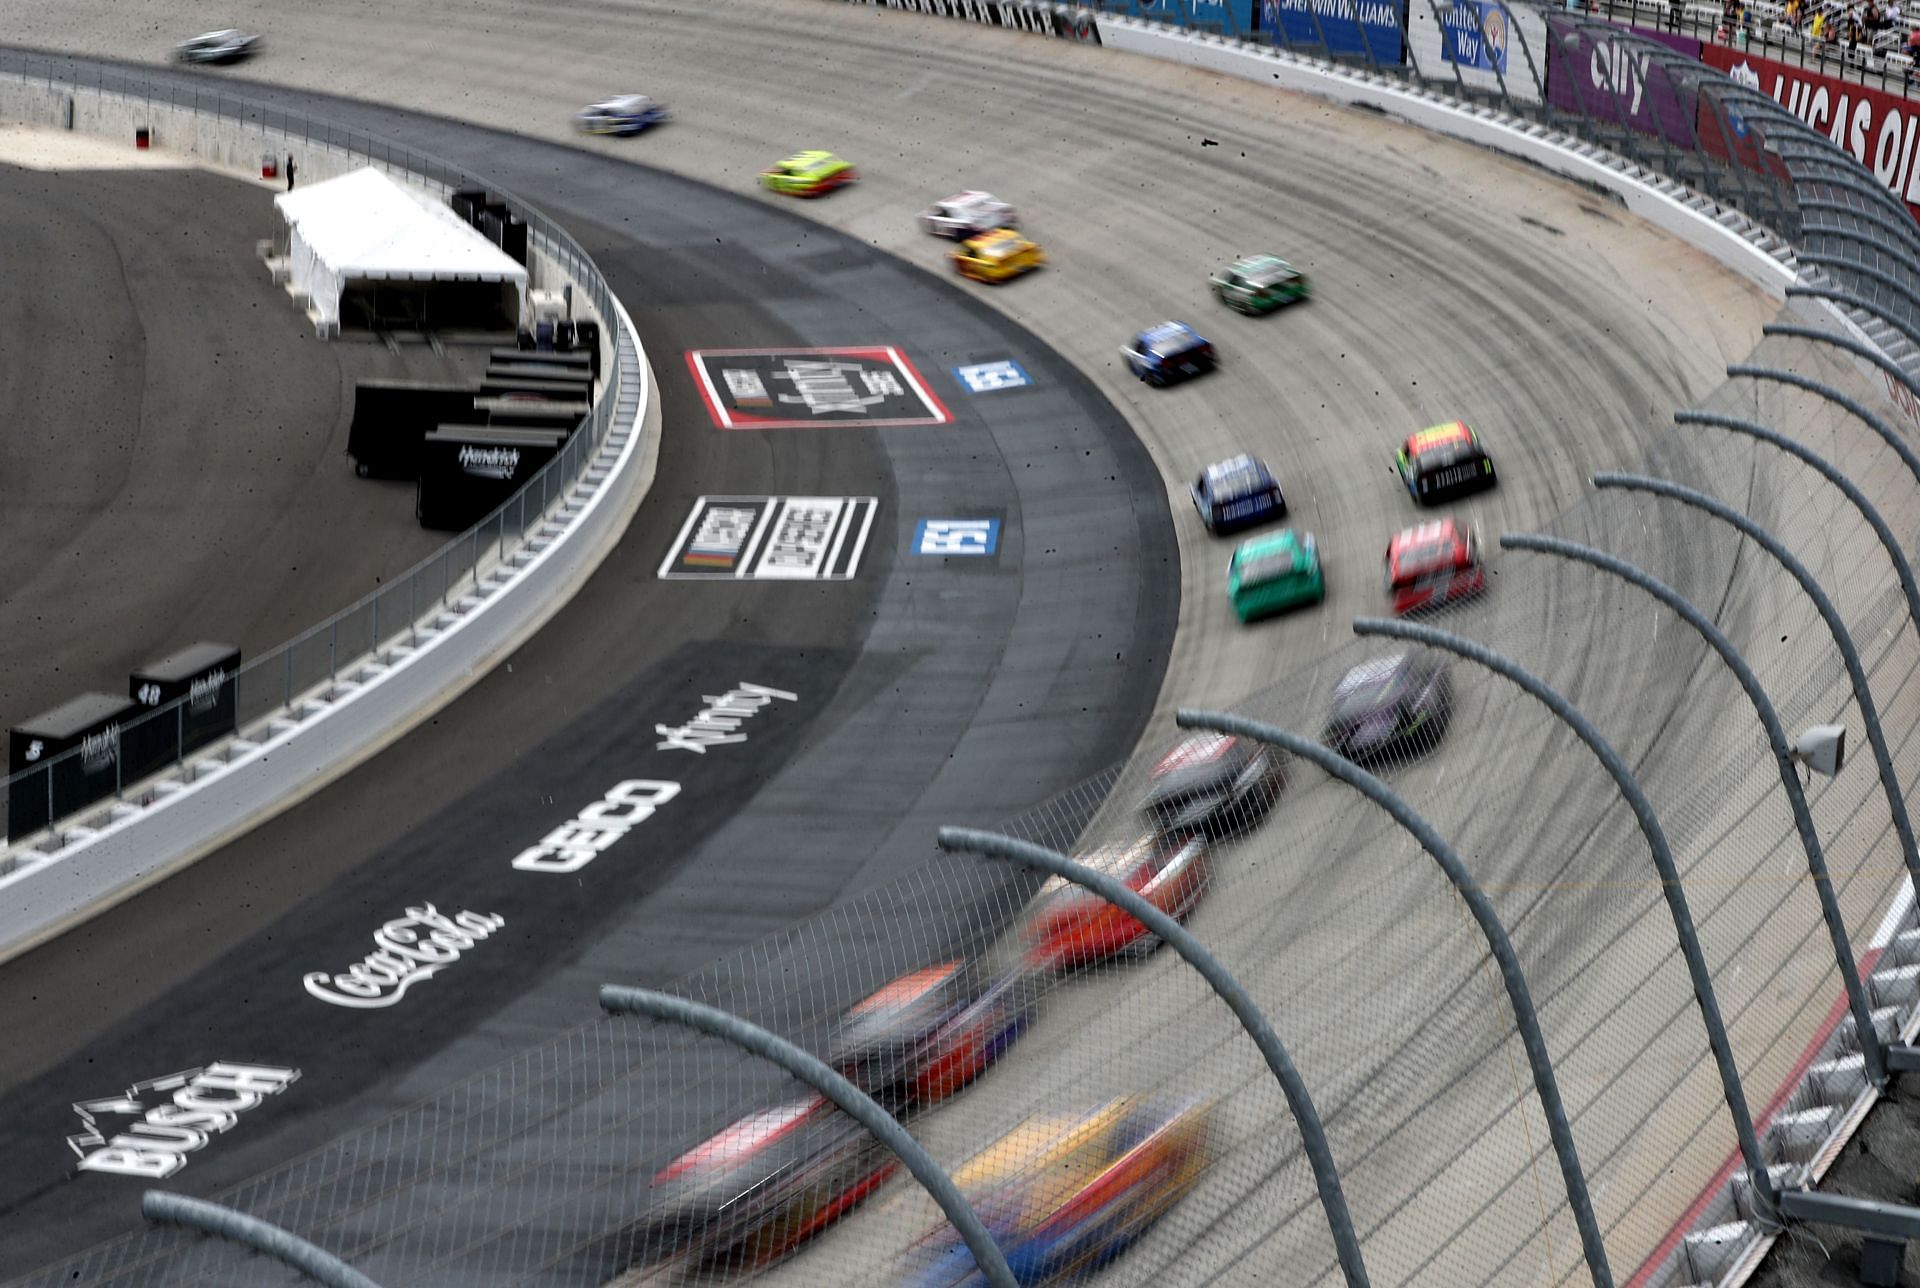 A general view of cars racing during the NASCAR Cup Series Drydene 400 at Dover International Speedway. (Photo by James Gilbert/Getty Images)